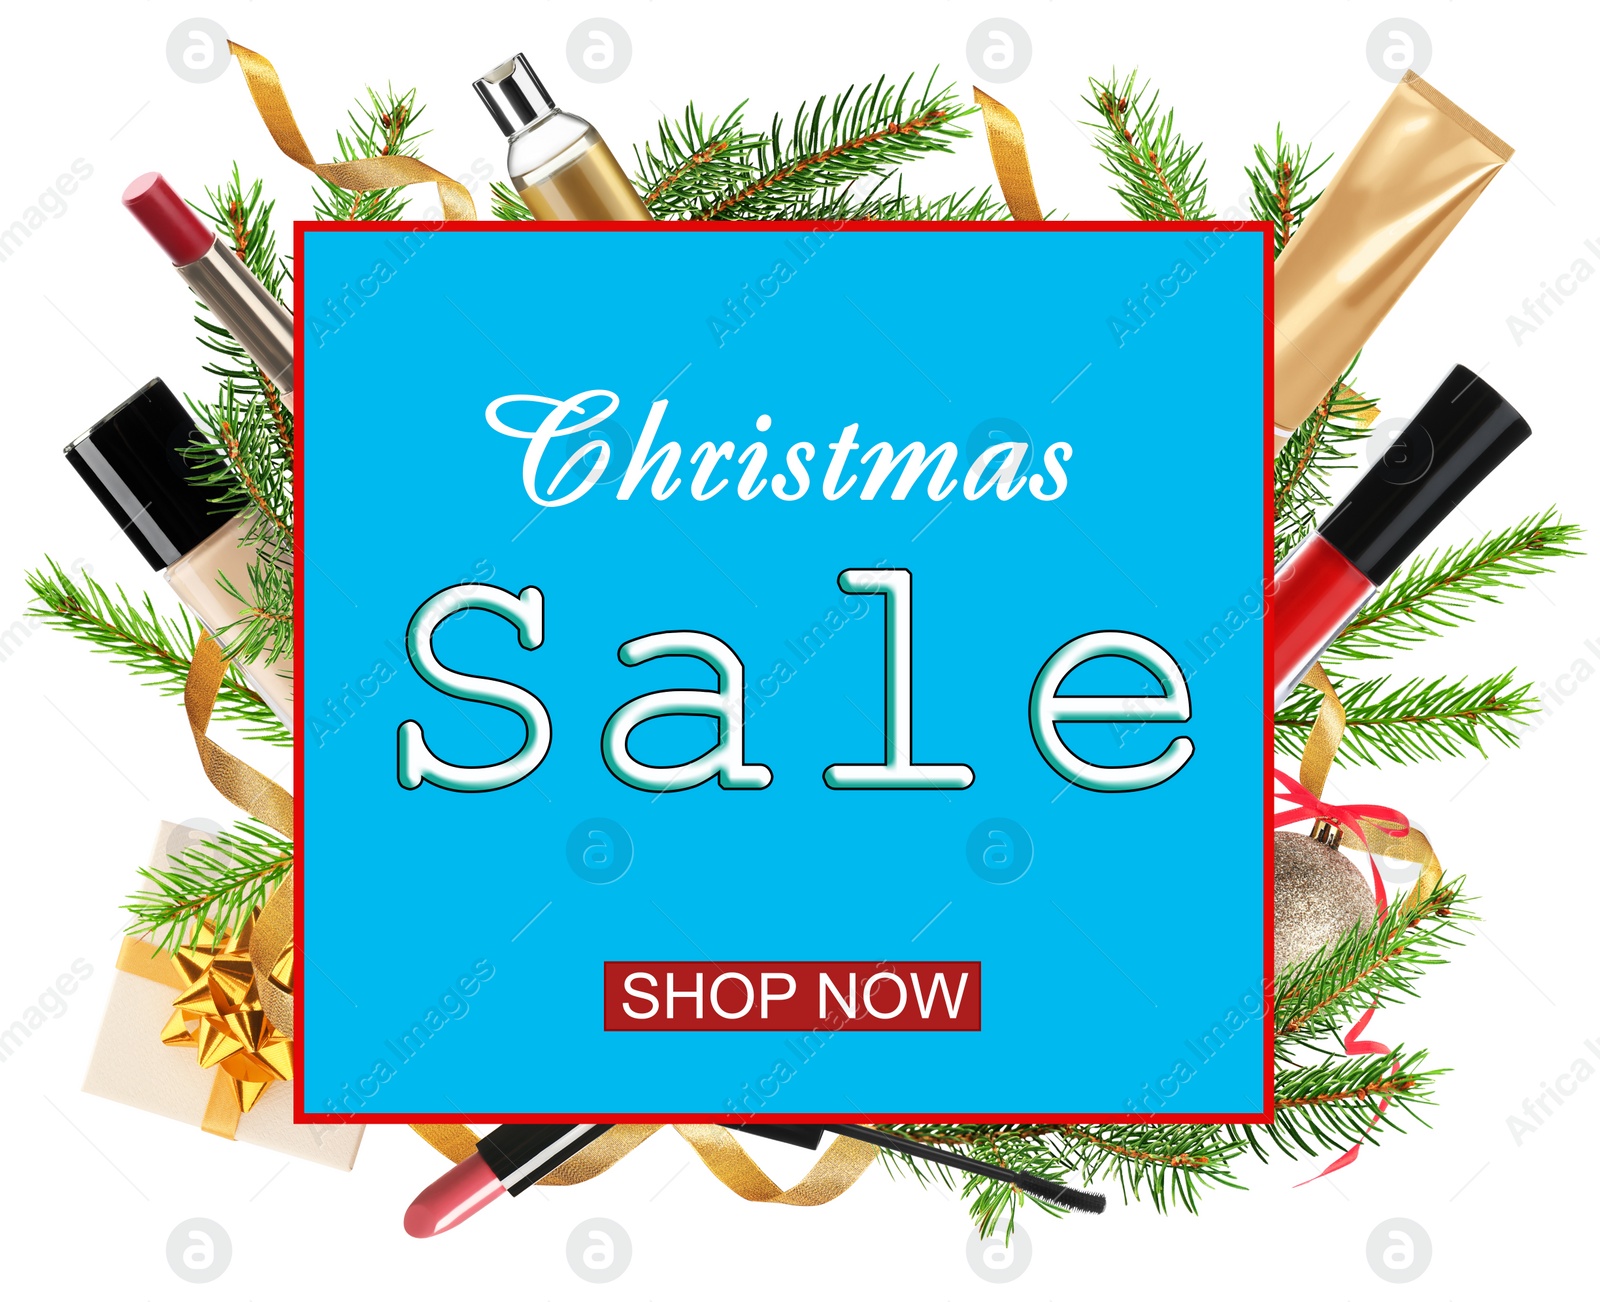 Image of Christmas sale ad with makeup products and decor